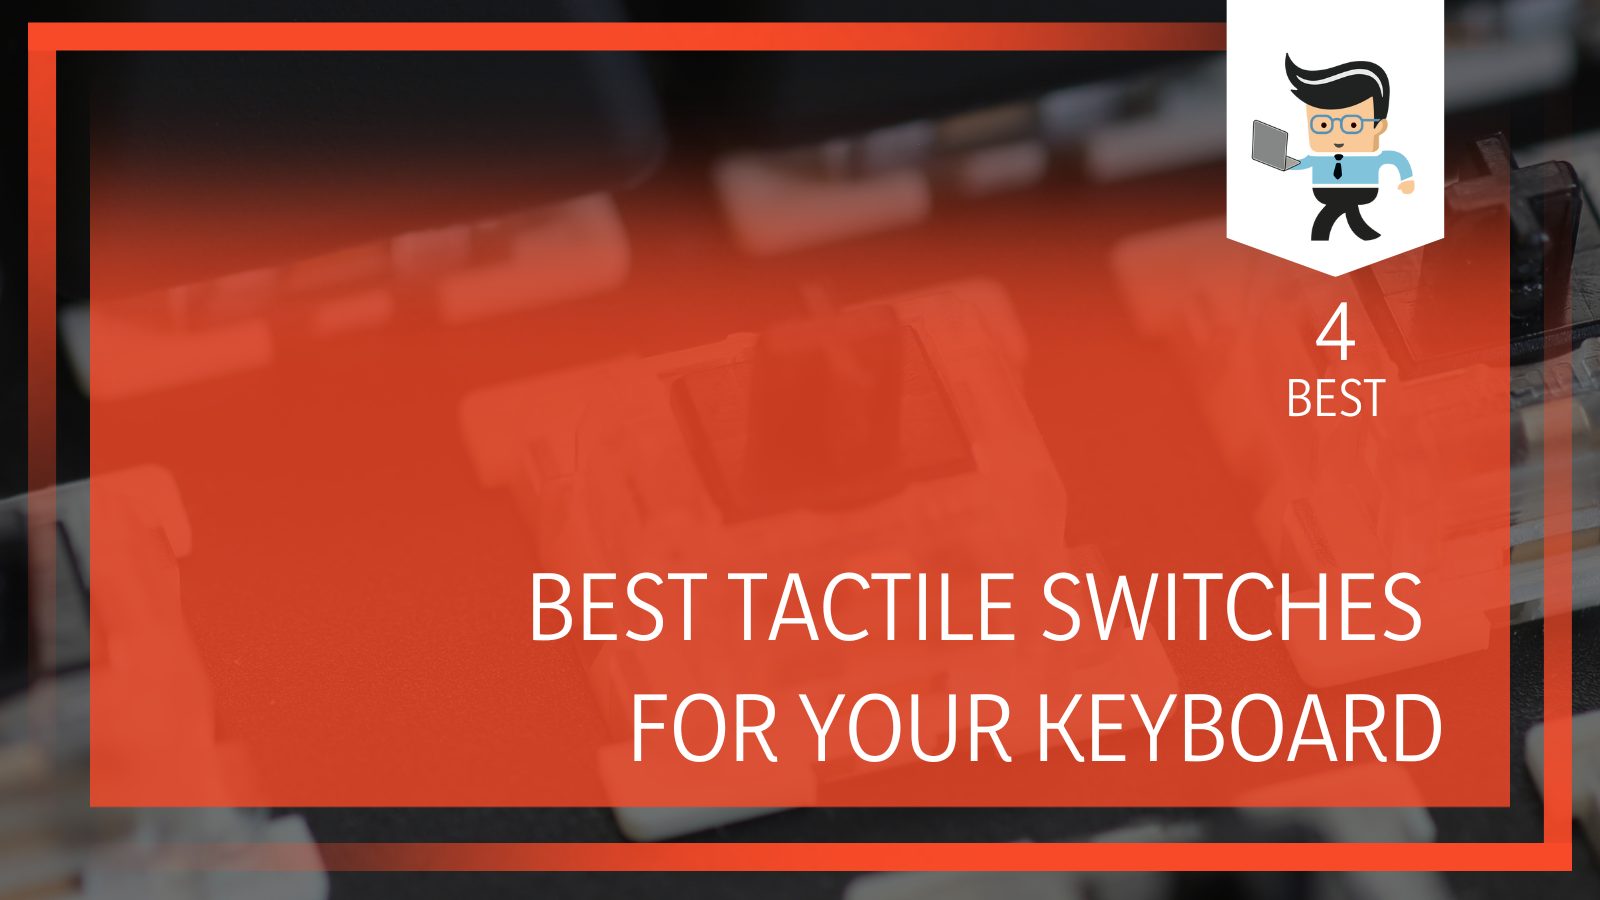 Choose the Best Tactile Switches for Keyboard